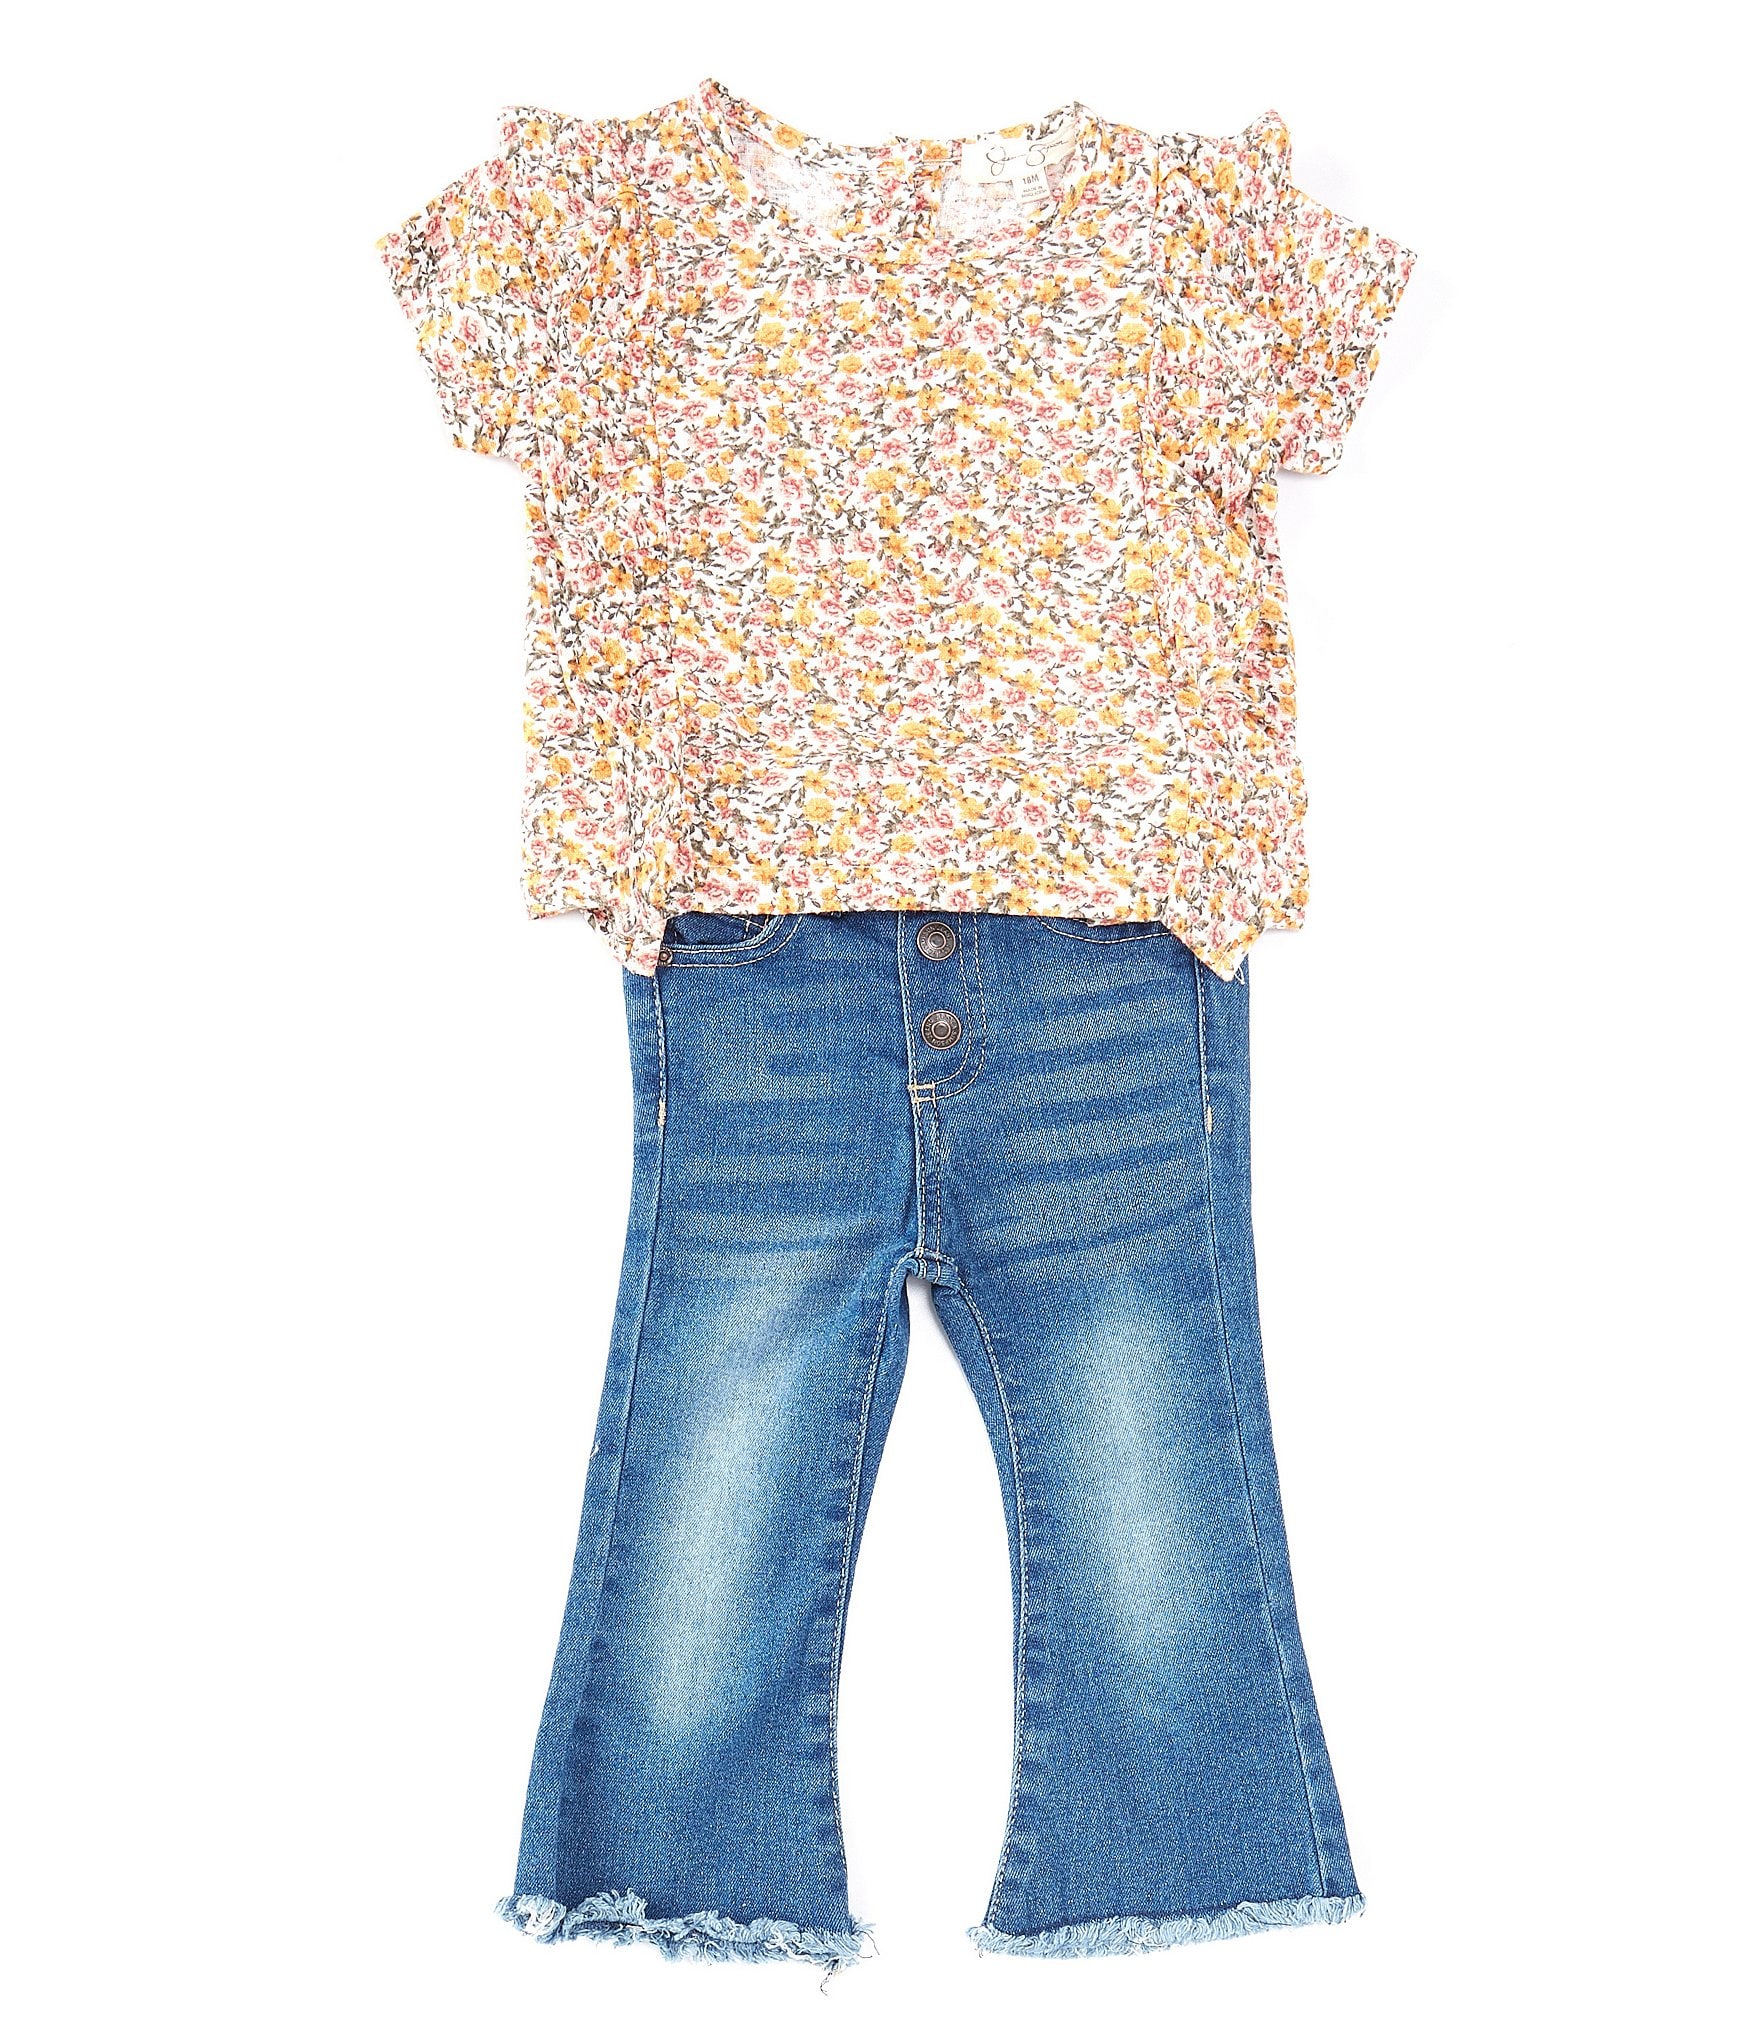 Stylish Baby Girl Sister Set In: Half Sleeve Shirt And Jeans Pants For  Summer And Spring Outfits From Alex_zeng, $12.07 | DHgate.Com